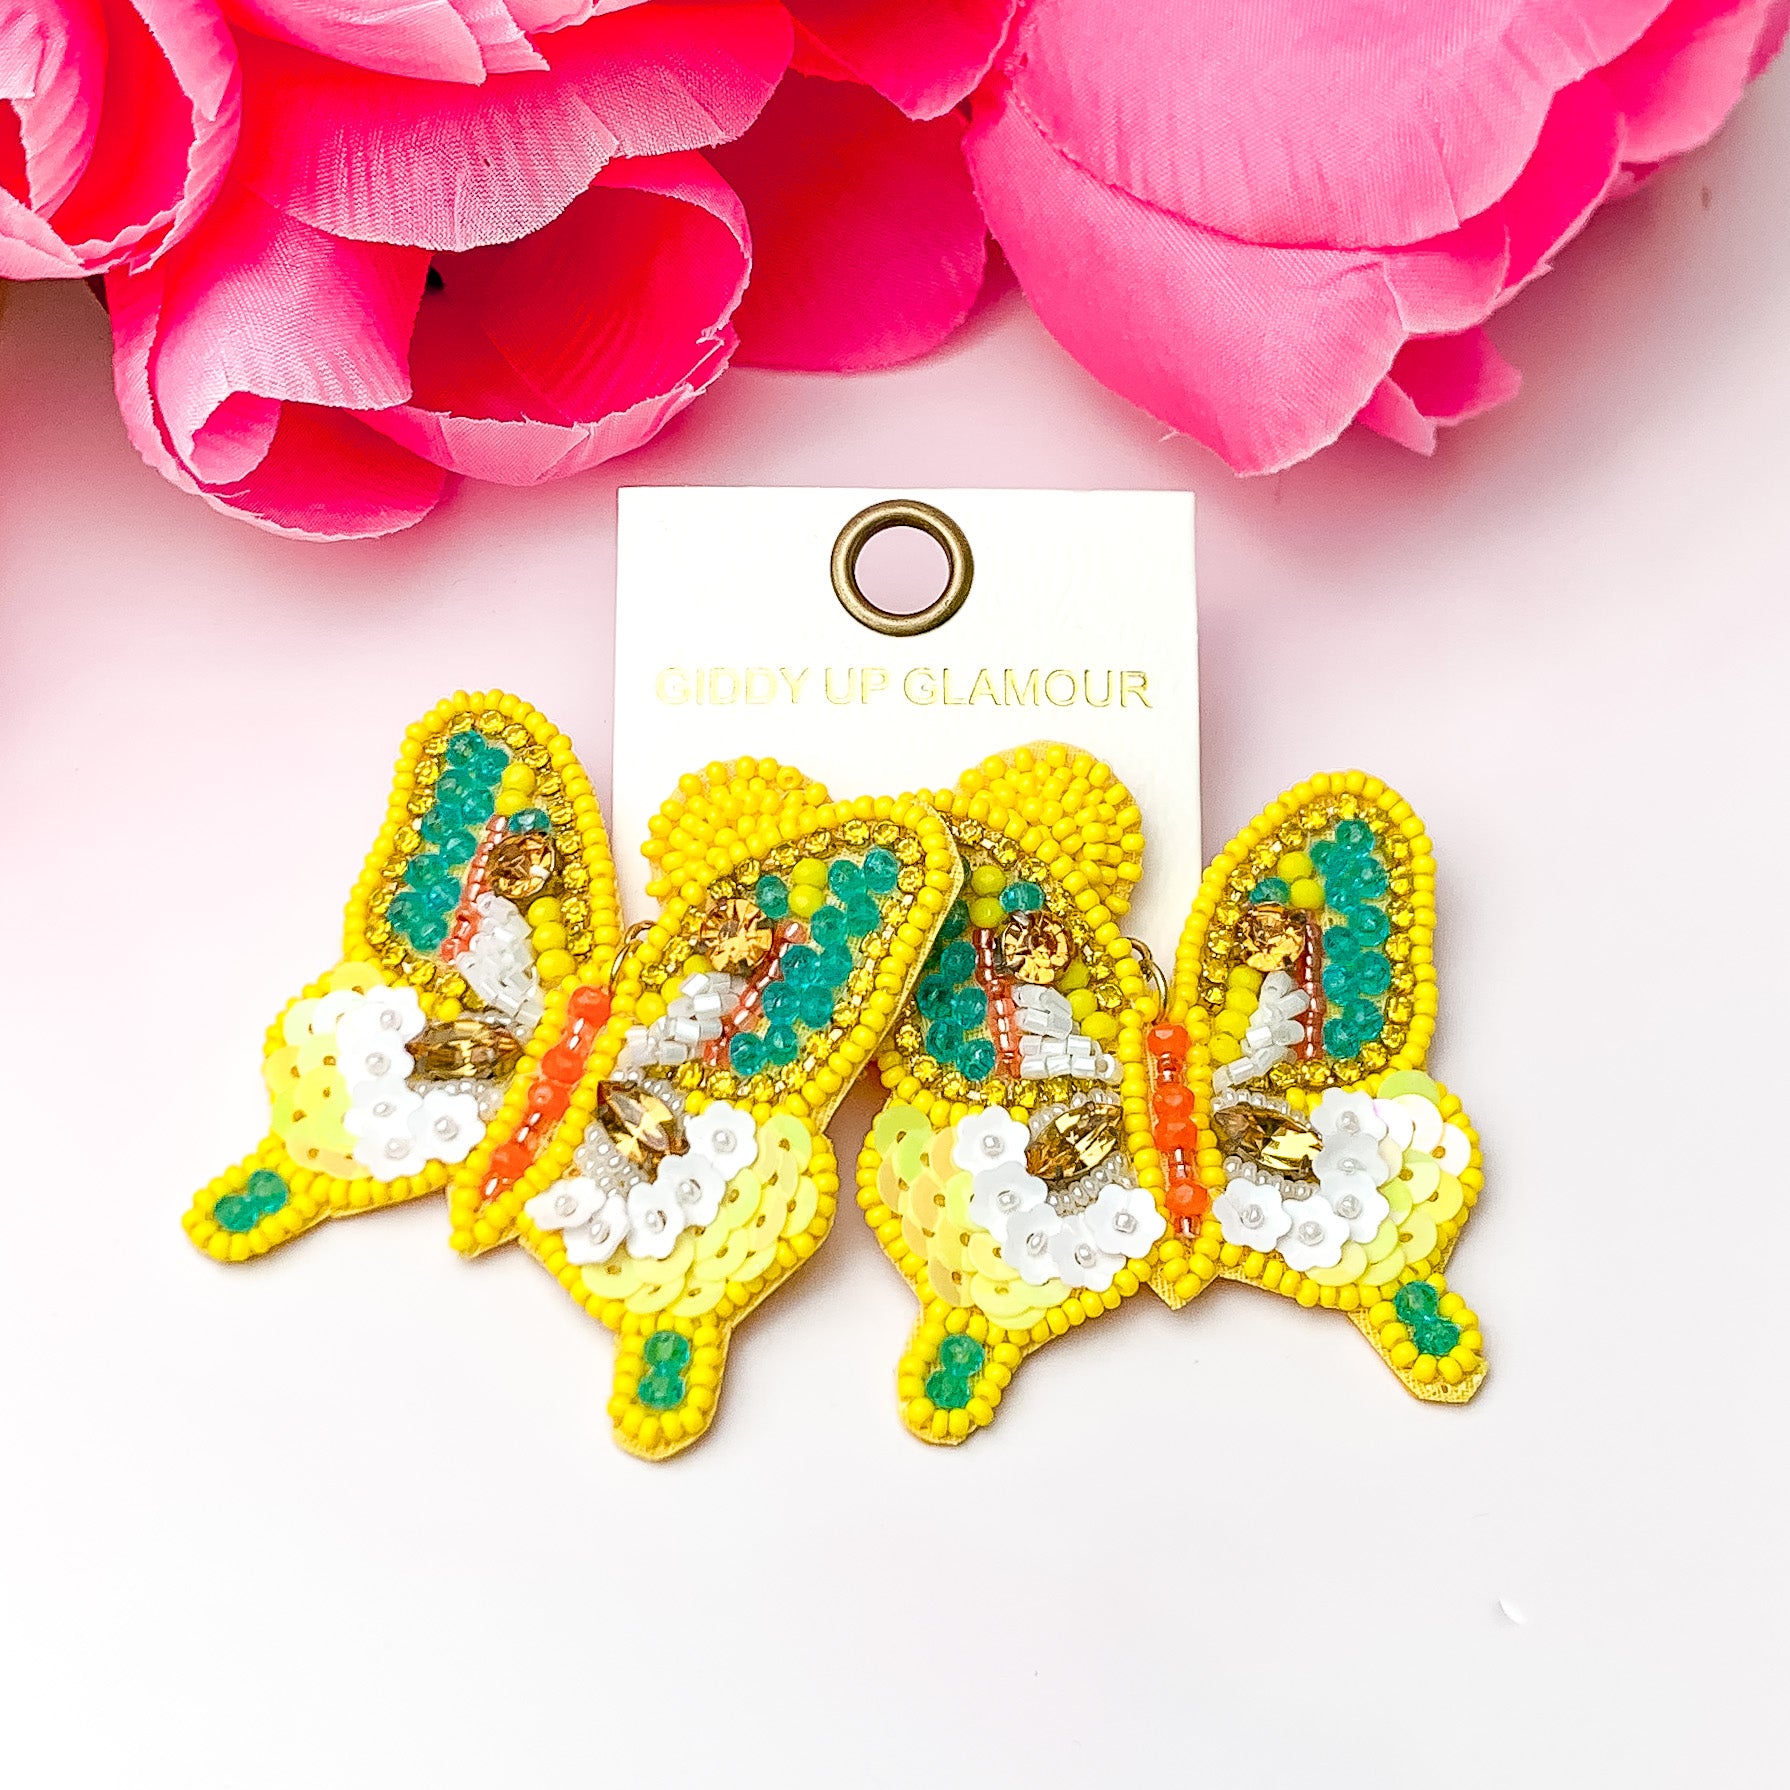 Beaded yellow butterfly earrings. Pictured on a white background with pink flowers on top.